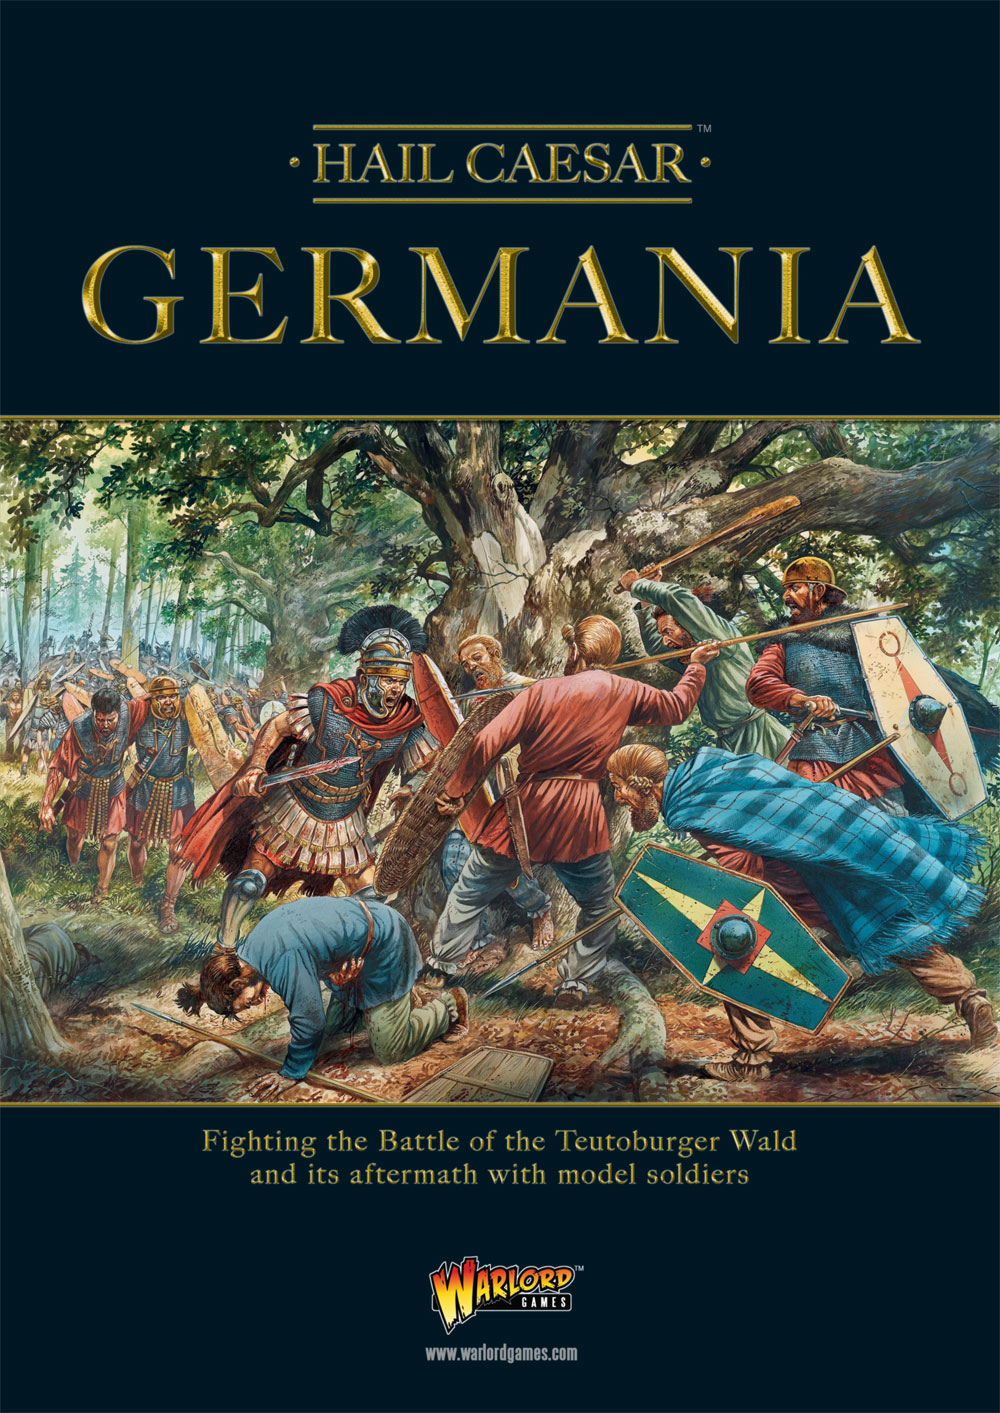 Incoming: The Tribes of Germania